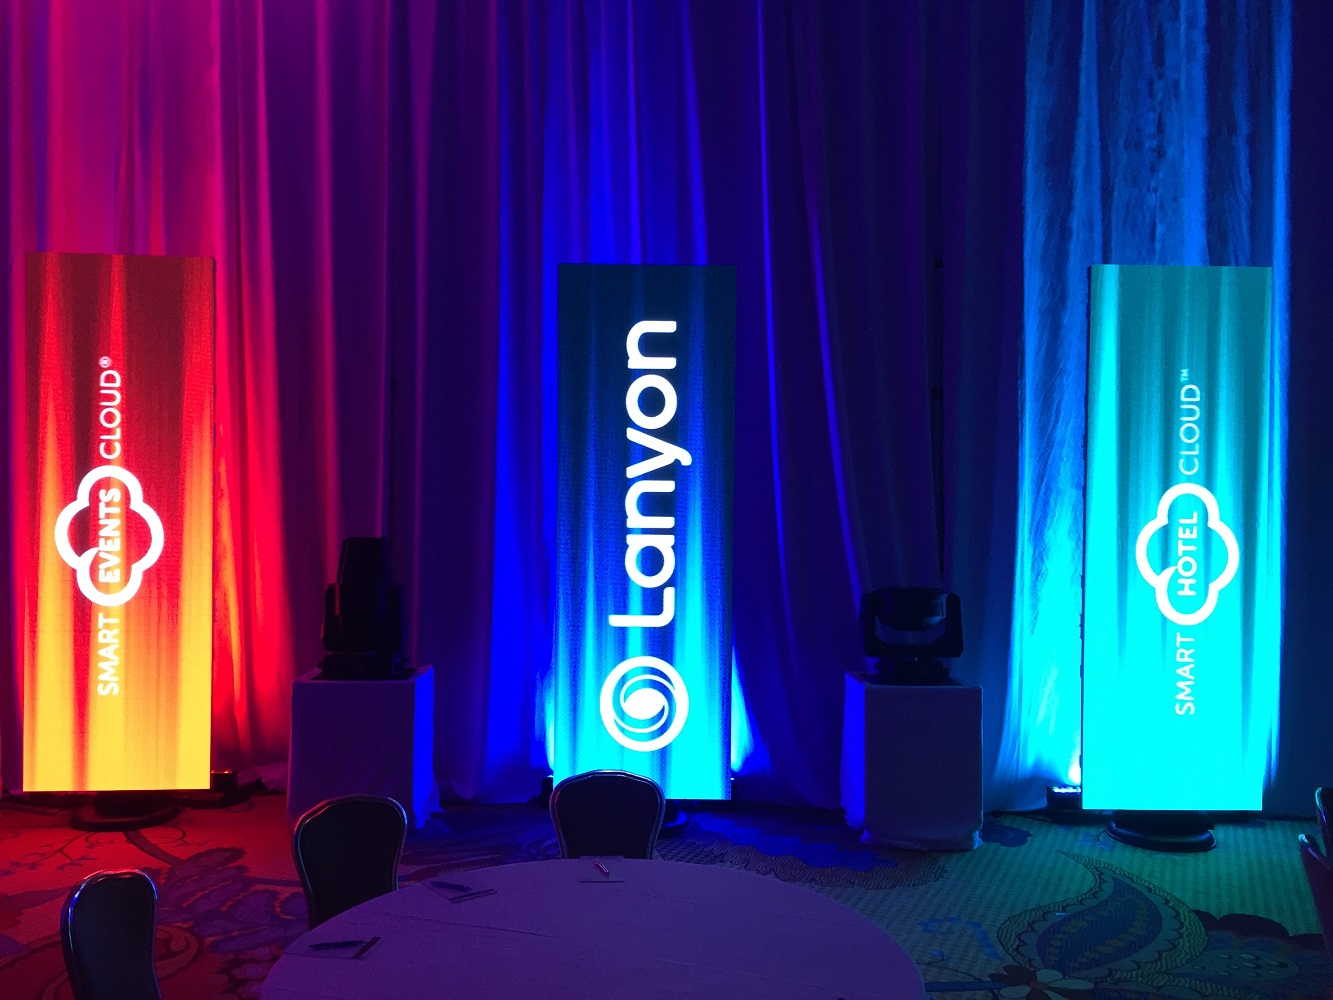 LED walls were used for branding